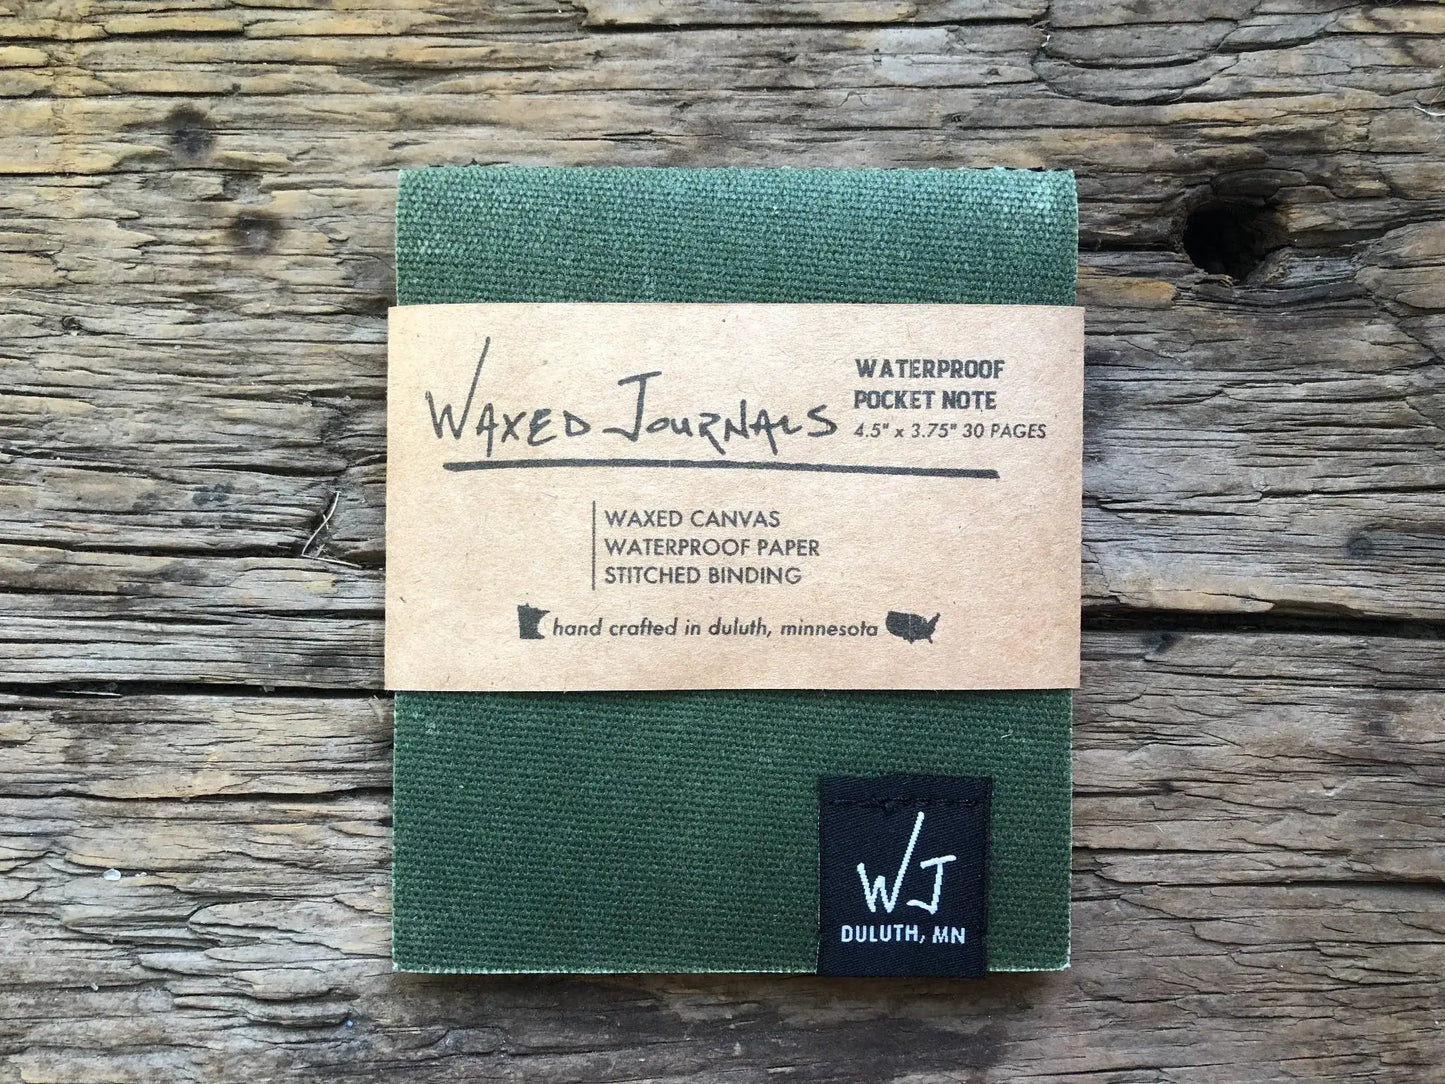 Green waxed journal notepad in packaging on wood.